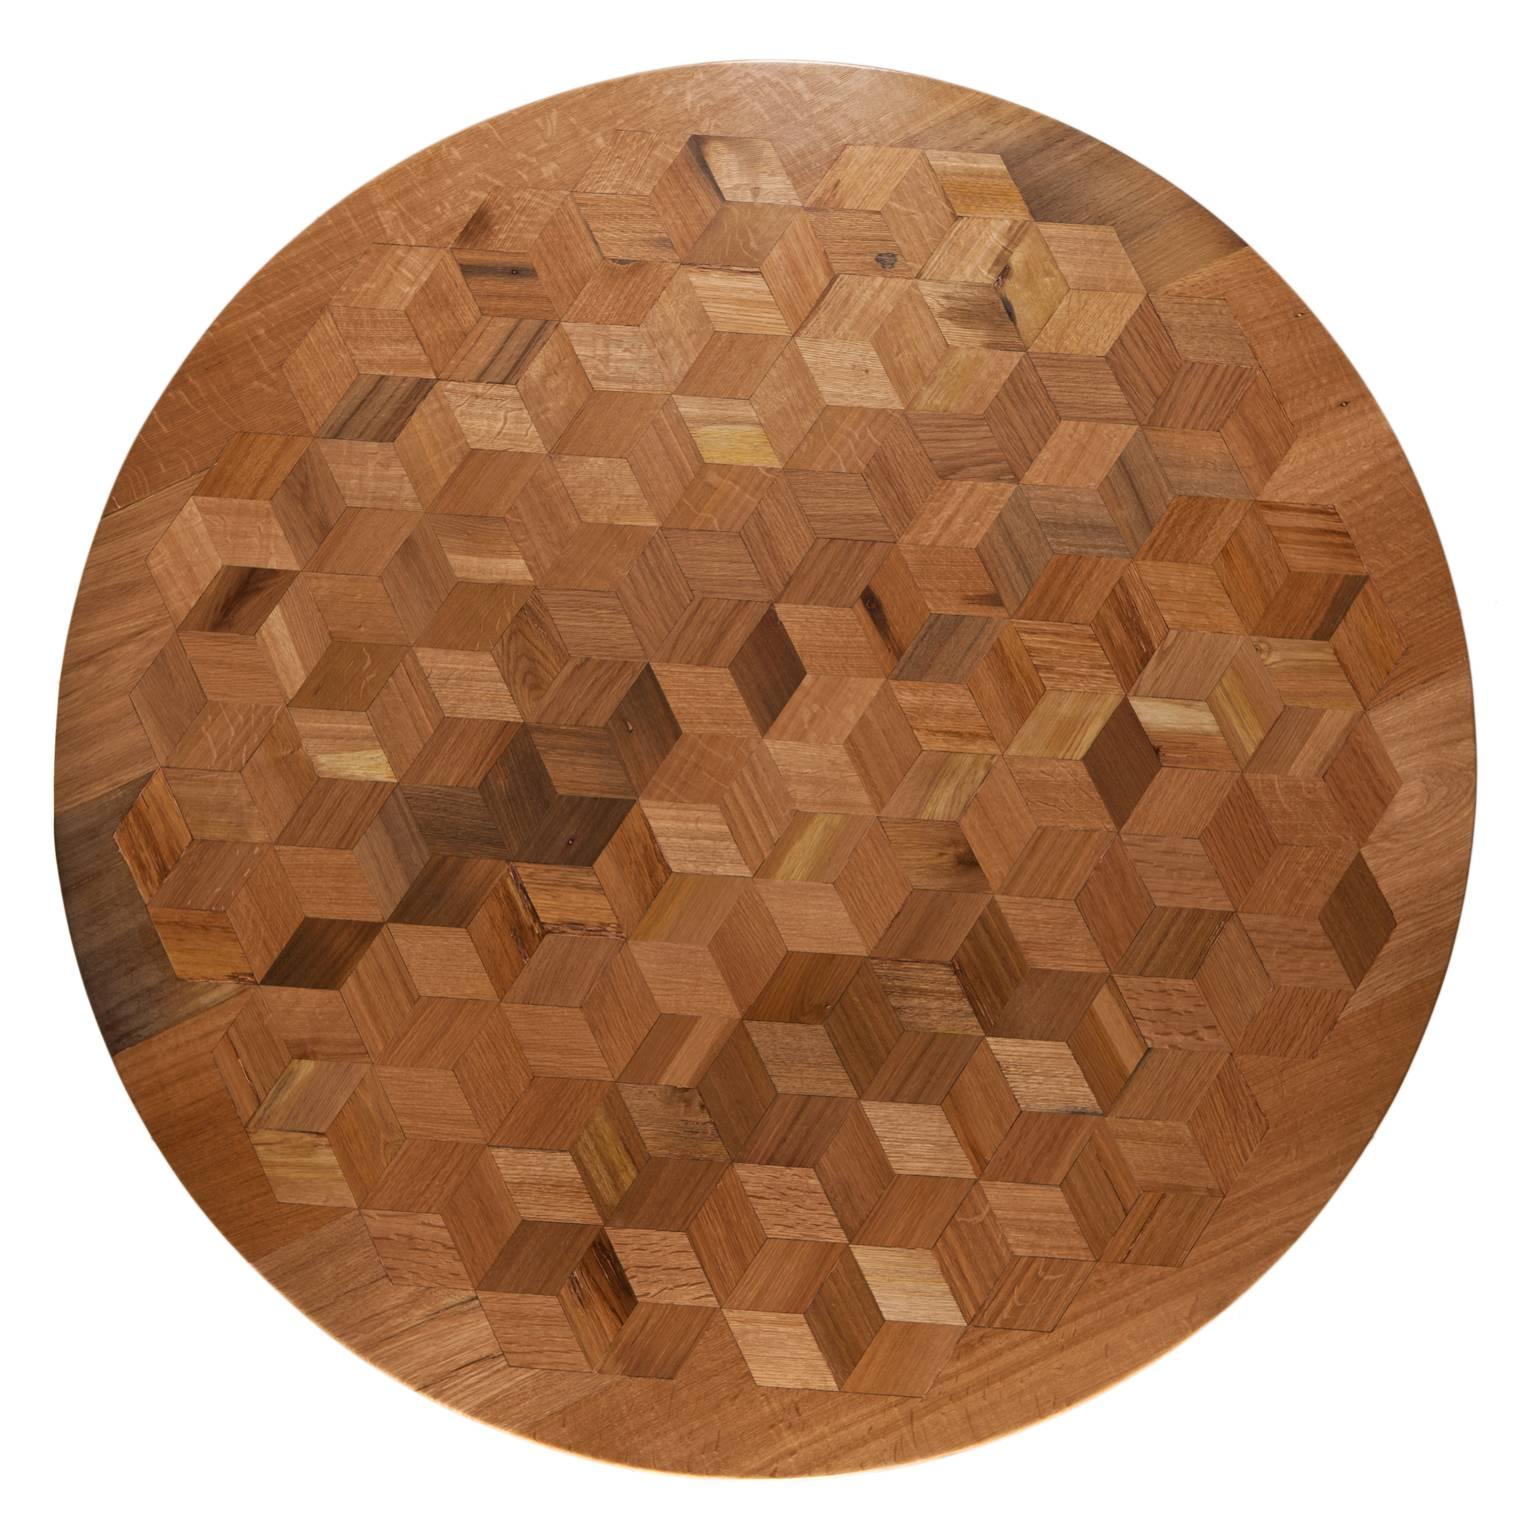 Inspired by the work of Escher, with Maurits we want to prove that a table doesn’t have to be antique to be an impressive testimony of craftsmanship. The marquetry table top in reclaimed Oak contains 222 rhombi cut from old Italian wine barrels. The